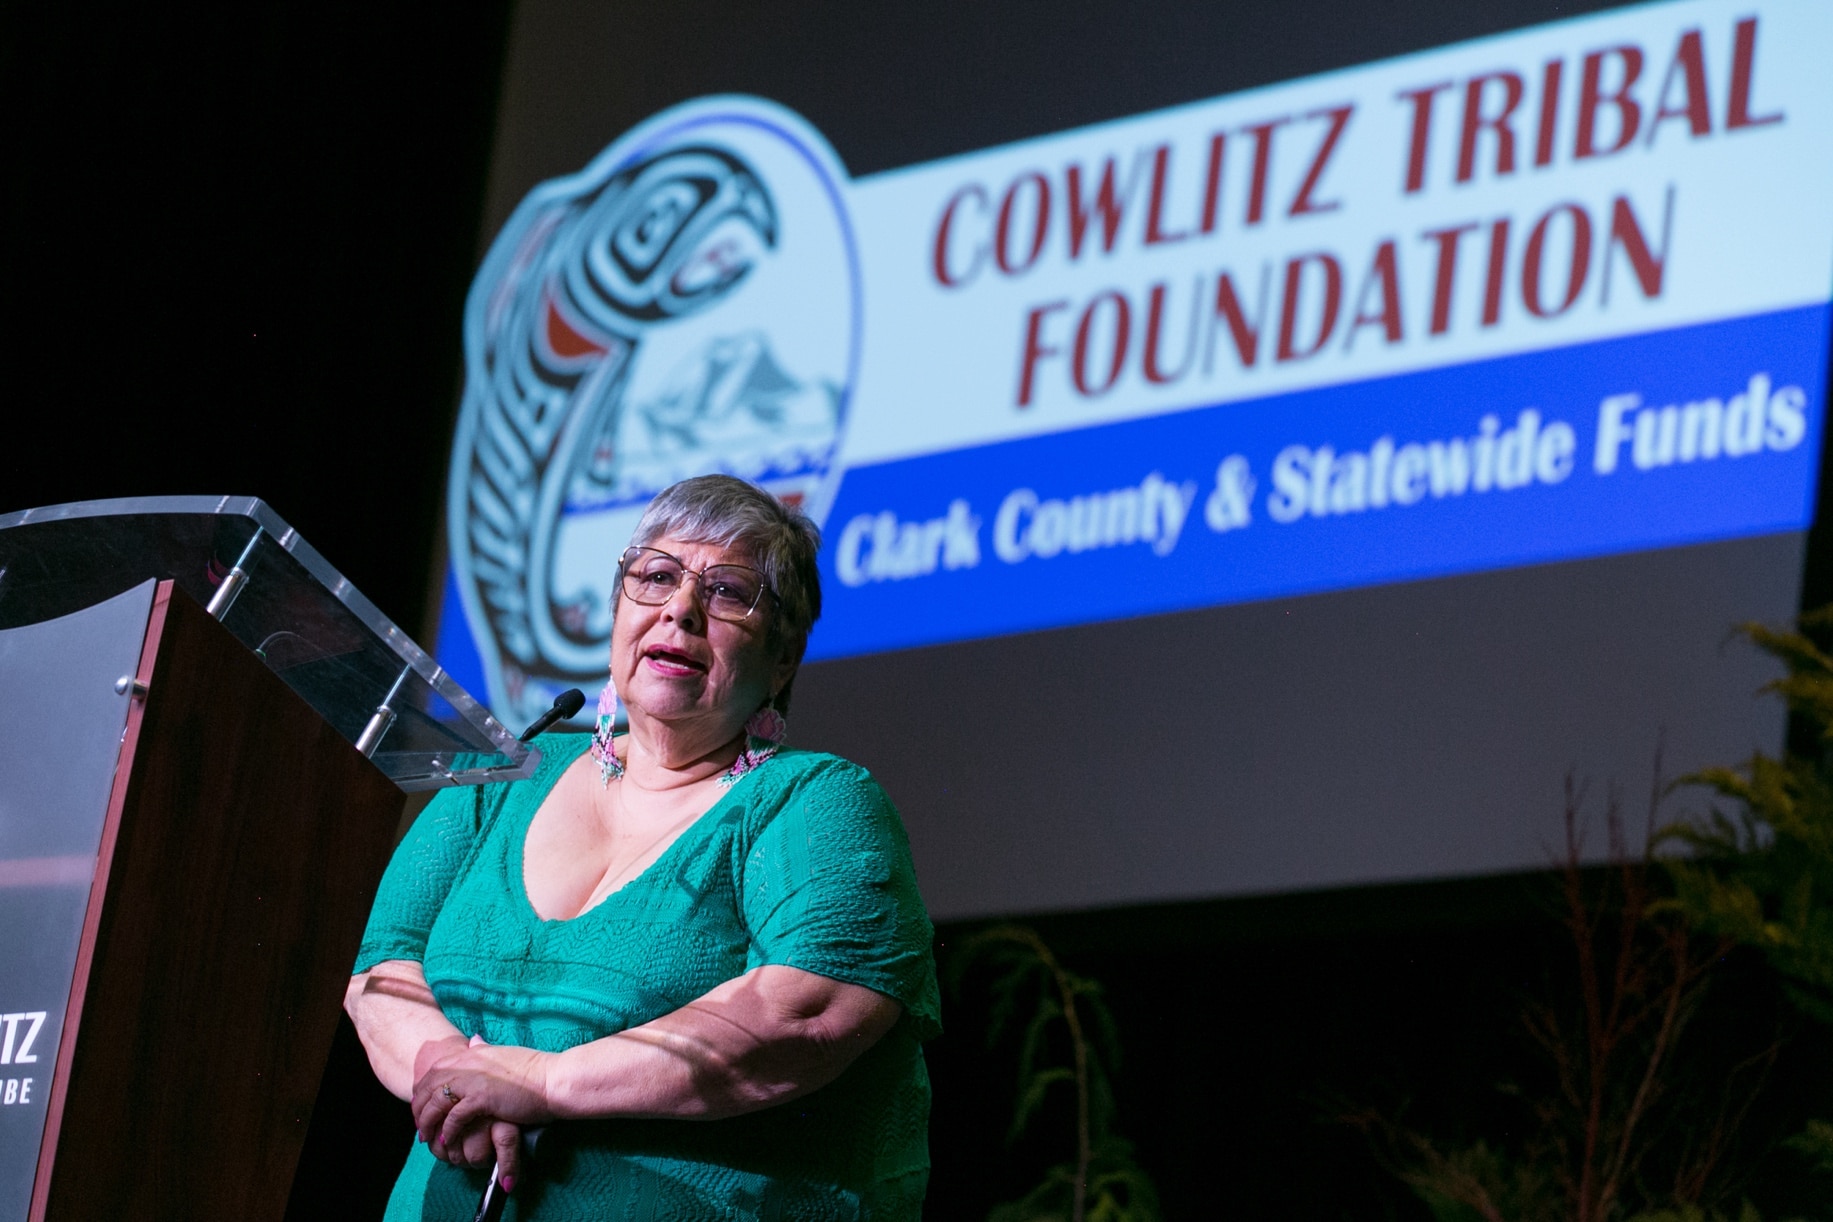 A woman speaks on stage in front of a sign that says Cowlitz Tribal Foundation